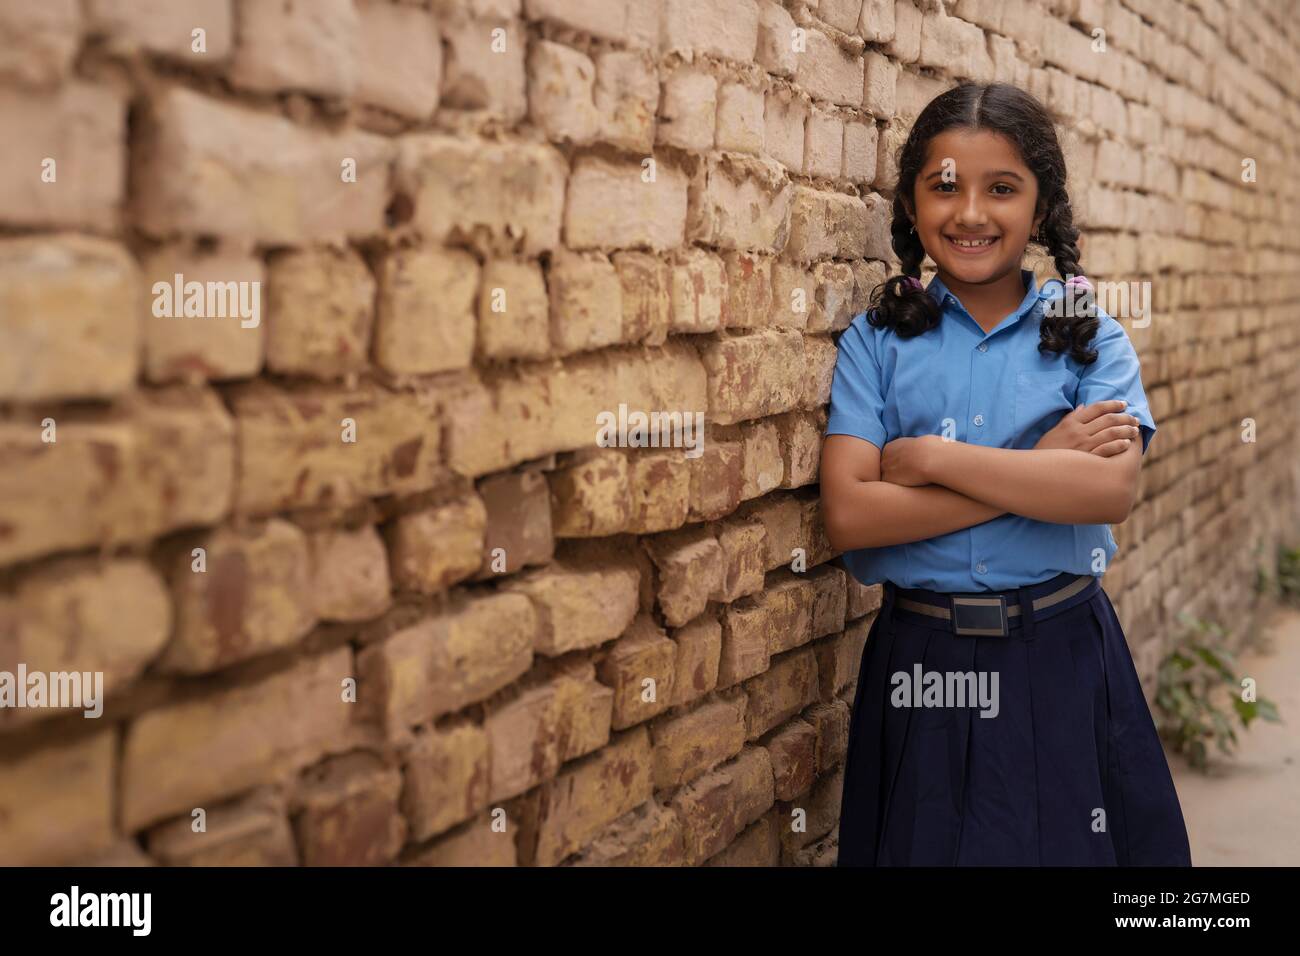 PORTRAIT OF A RURAL YOUNG GIRL POSING HAPPILY IN FRONT OF CAMERA Stock Photo